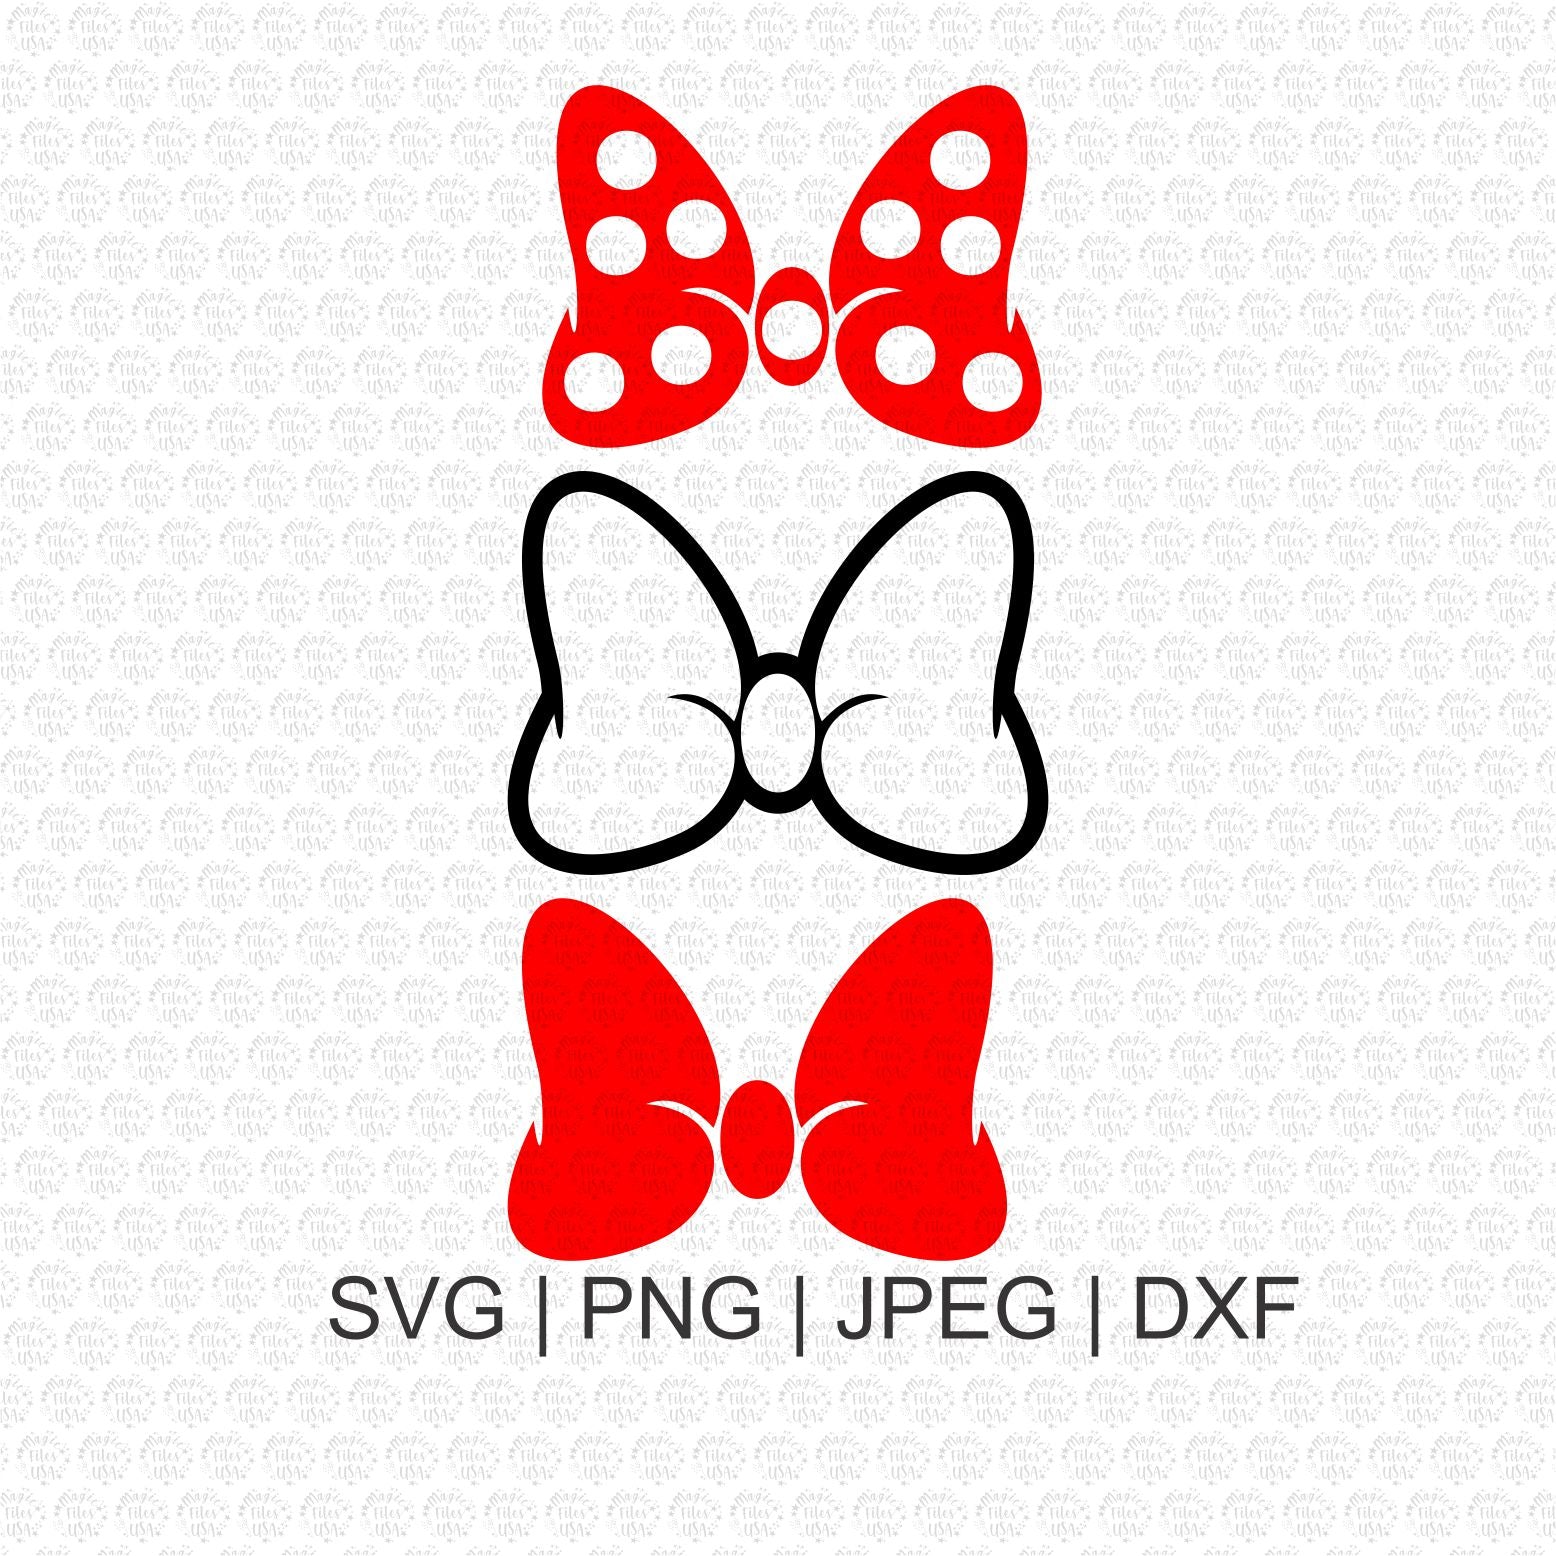 Download Minnie Mouse Bow Svg Minnie Head Svg Download Files Svg Files Minnie Mouse Svg Disney Svg Disneyland Svg Minnie Svg Minnie Vector My Easy Files